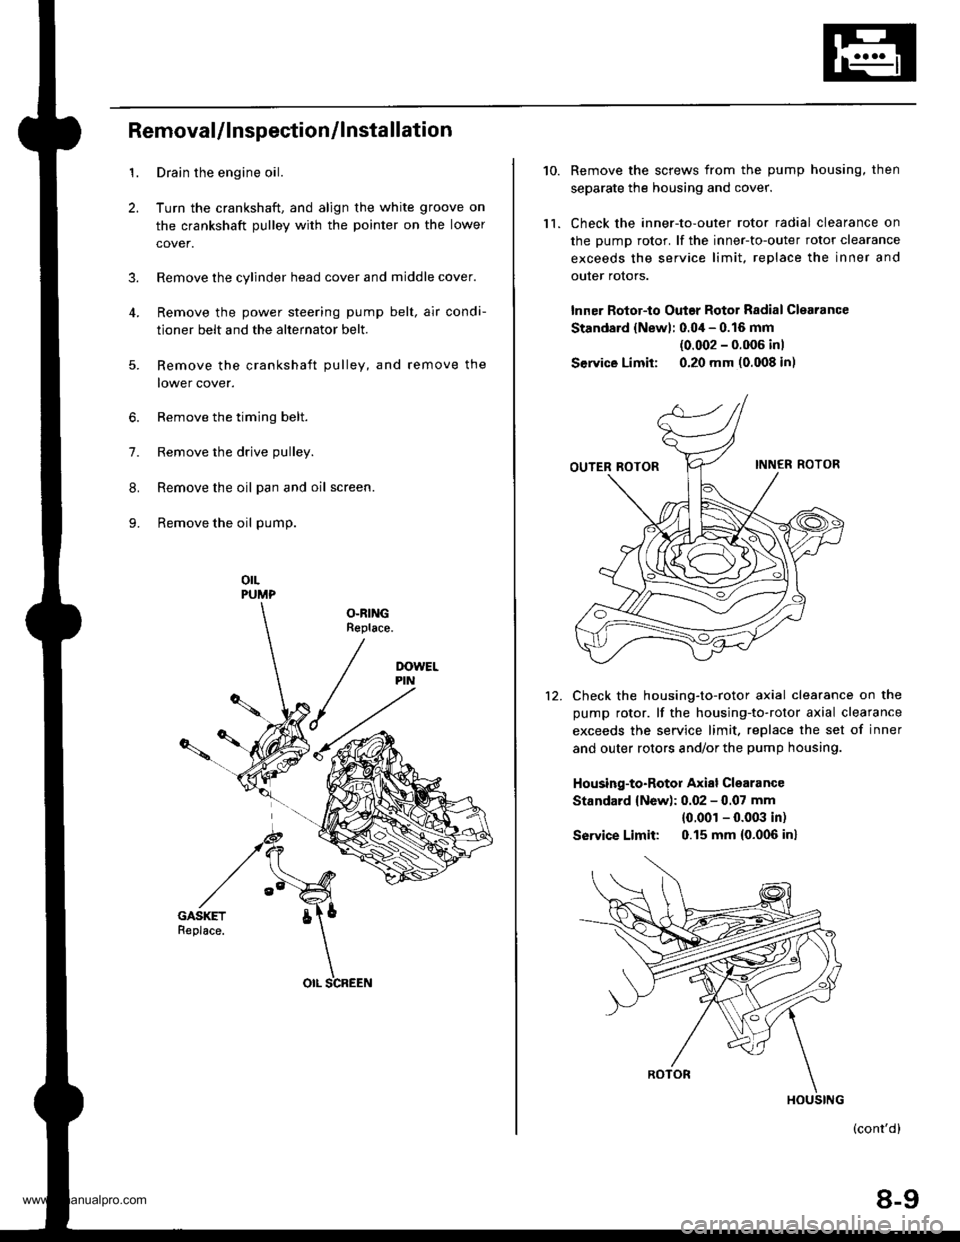 HONDA CR-V 1998 RD1-RD3 / 1.G Workshop Manual 
1.
2.
3.
RemovaUlnspection/lnstallation
Drain the engine oil.
Turn the crankshaft, and align the white groove on
the crankshaft pulley with the pointer on the lower
cover.
Remove the cylinder head co